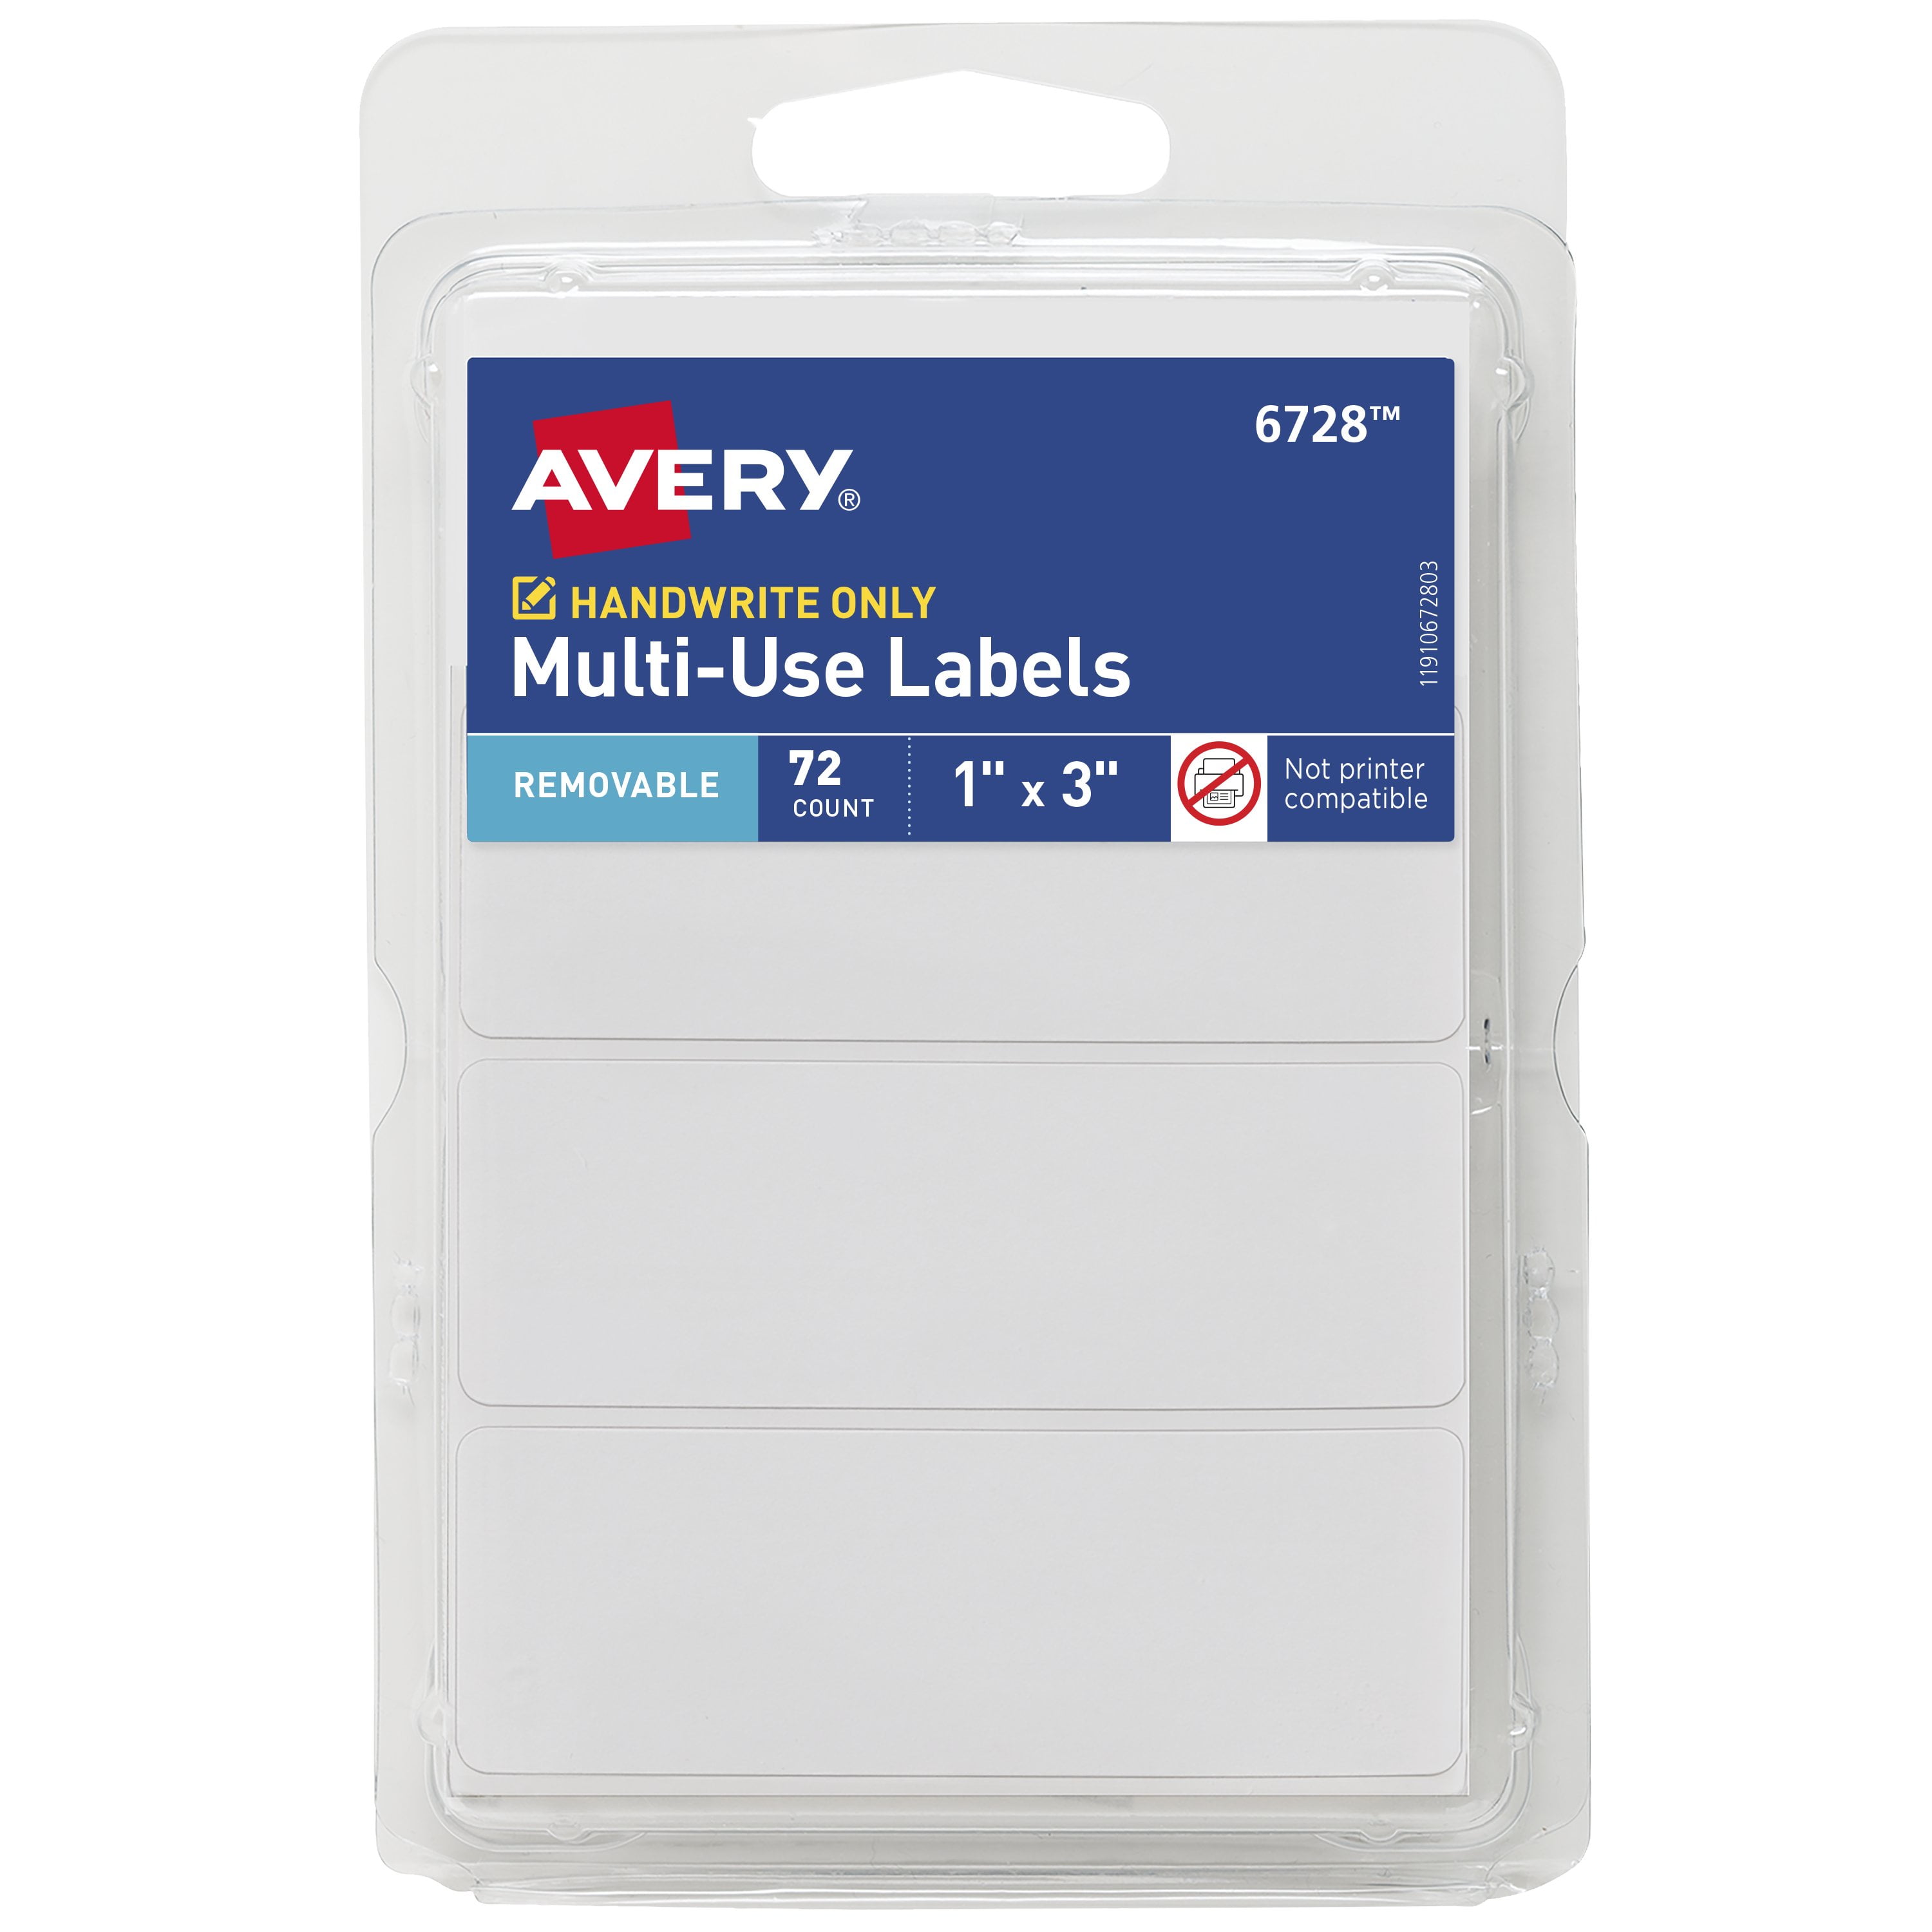 Avery Multi-Use Labels, White, 1" x 3", Removable, Handwrite, 72 Labels (16728)